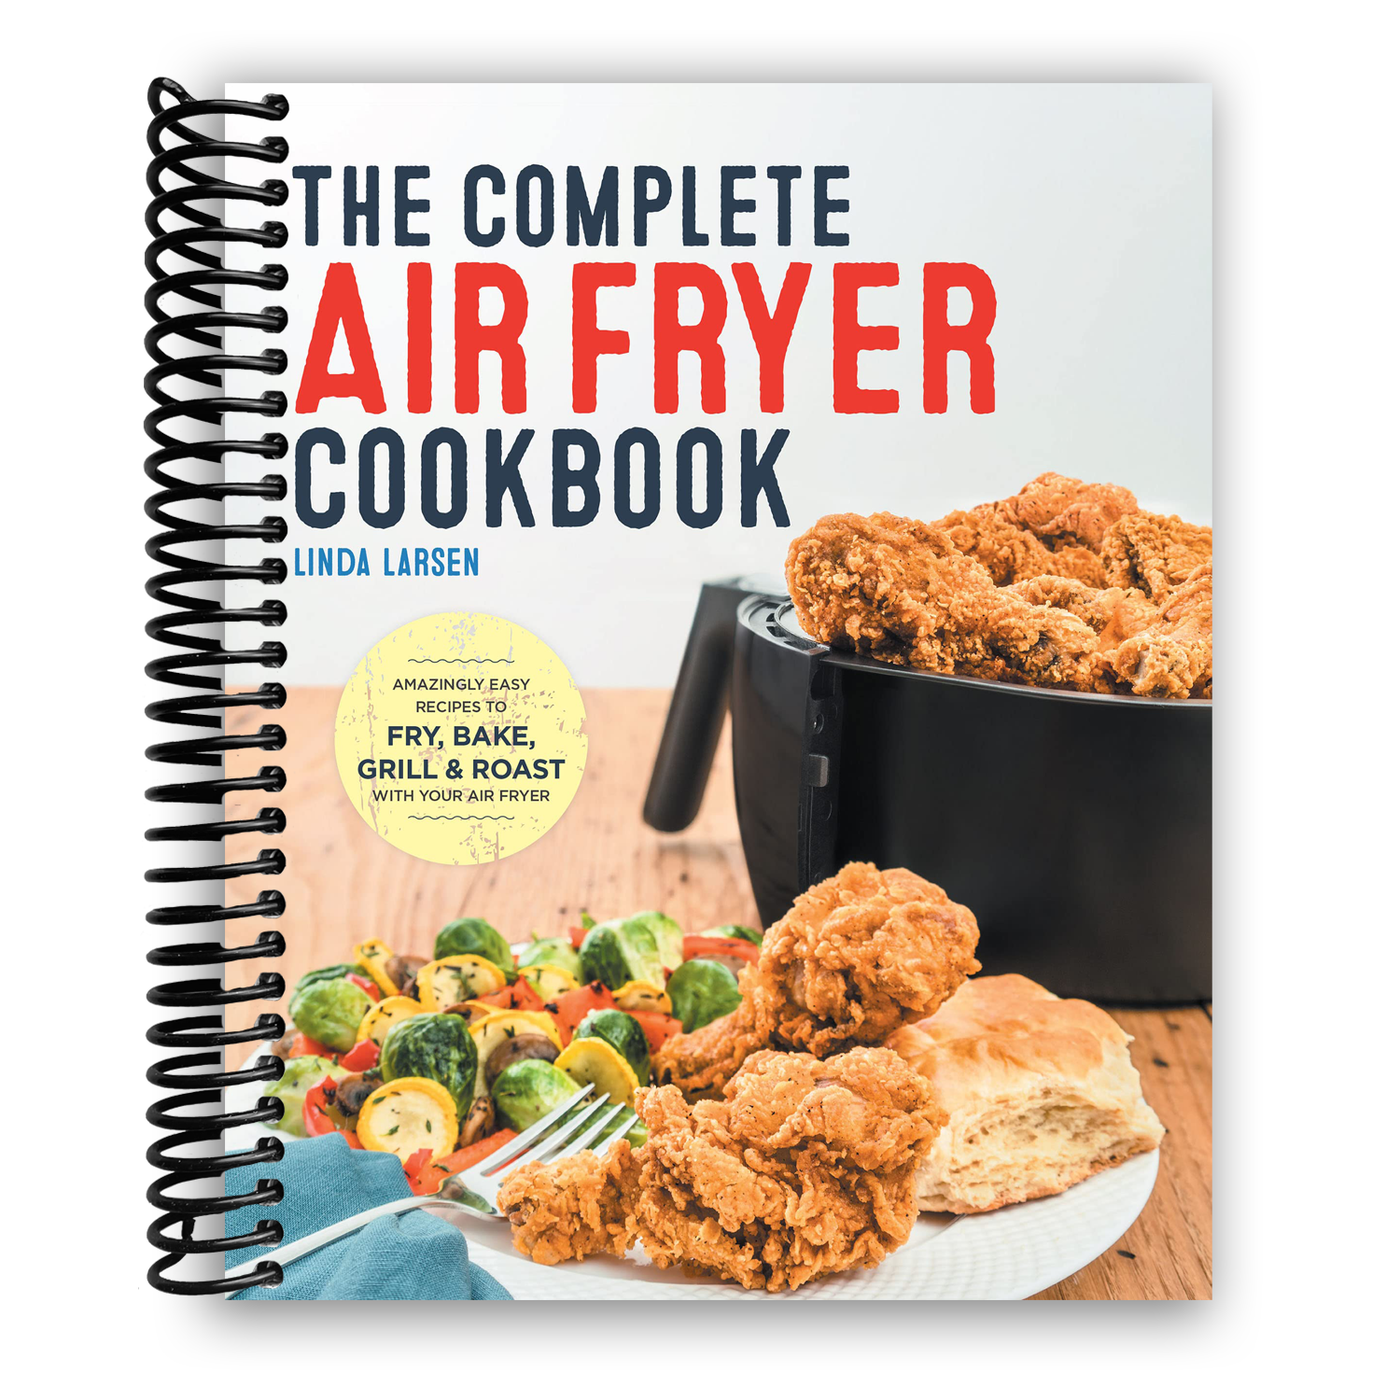 The Complete Air Fryer Cookbook: Amazingly Easy Recipes to Fry, Bake, Grill, and Roast with Your Air Fryer (Spiral Bound)